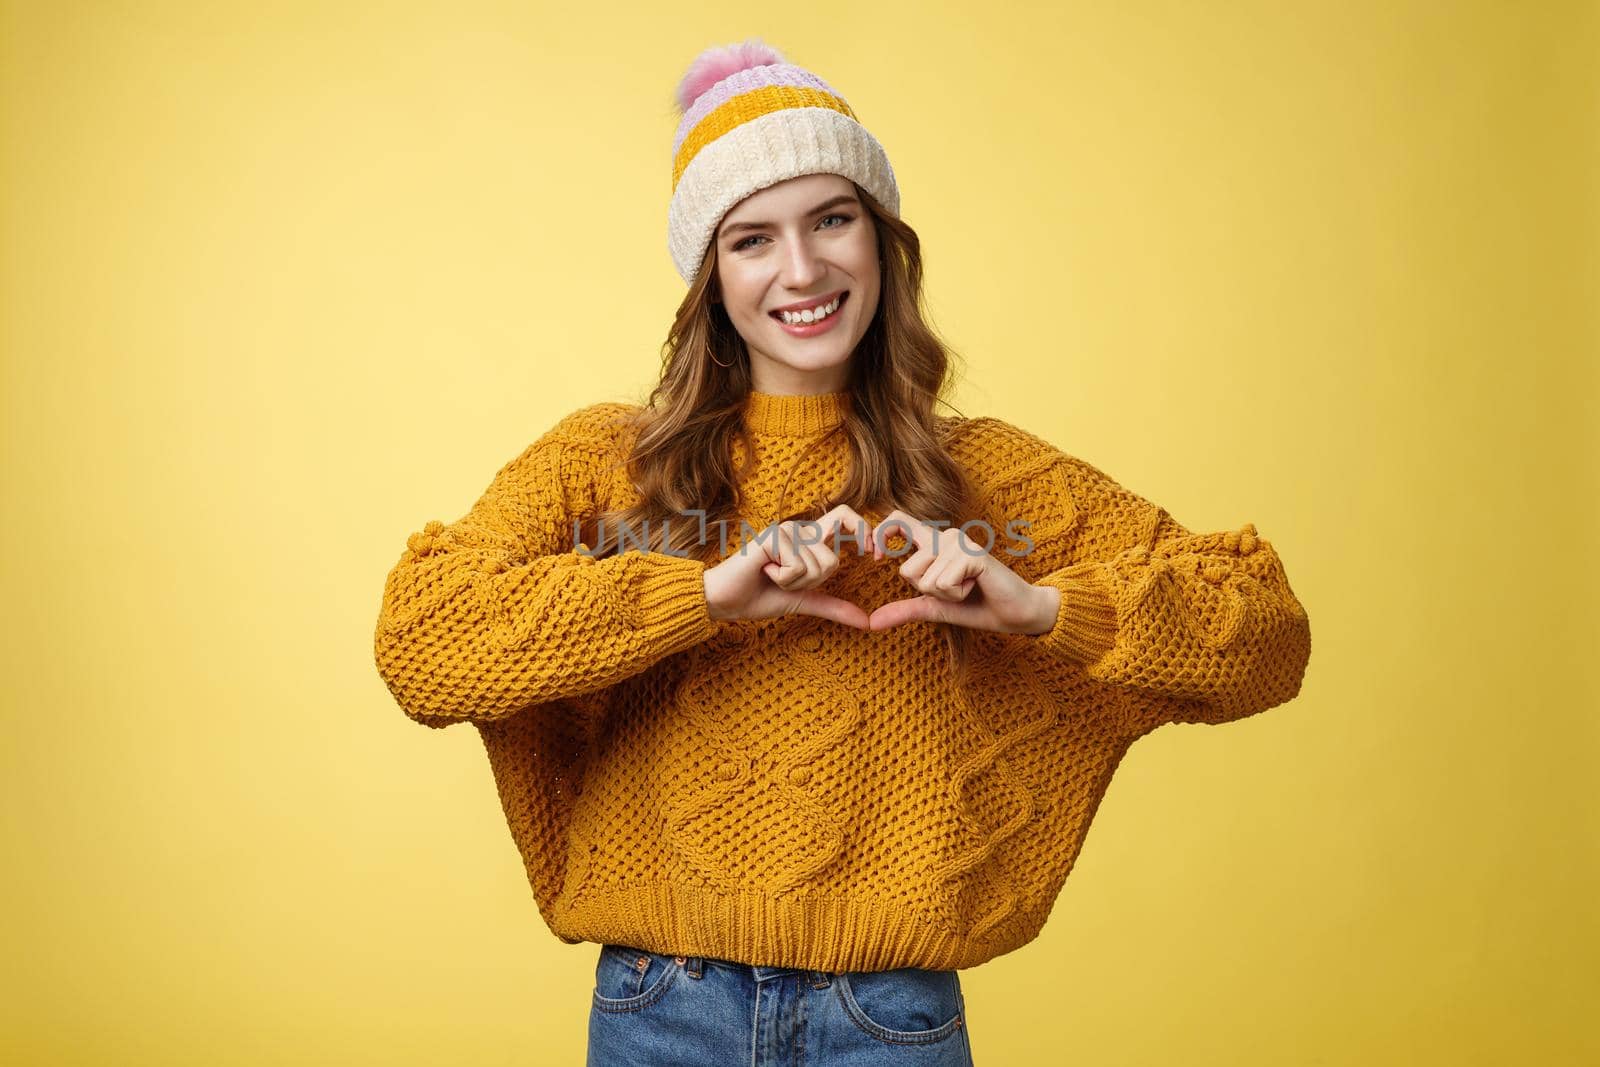 Girl brings peace love show heart gesture tilting head friendly smiling expressing sympathy passion confessing boyfriend warm feelings, heartbit sign, grinning flirty, standing yellow background.